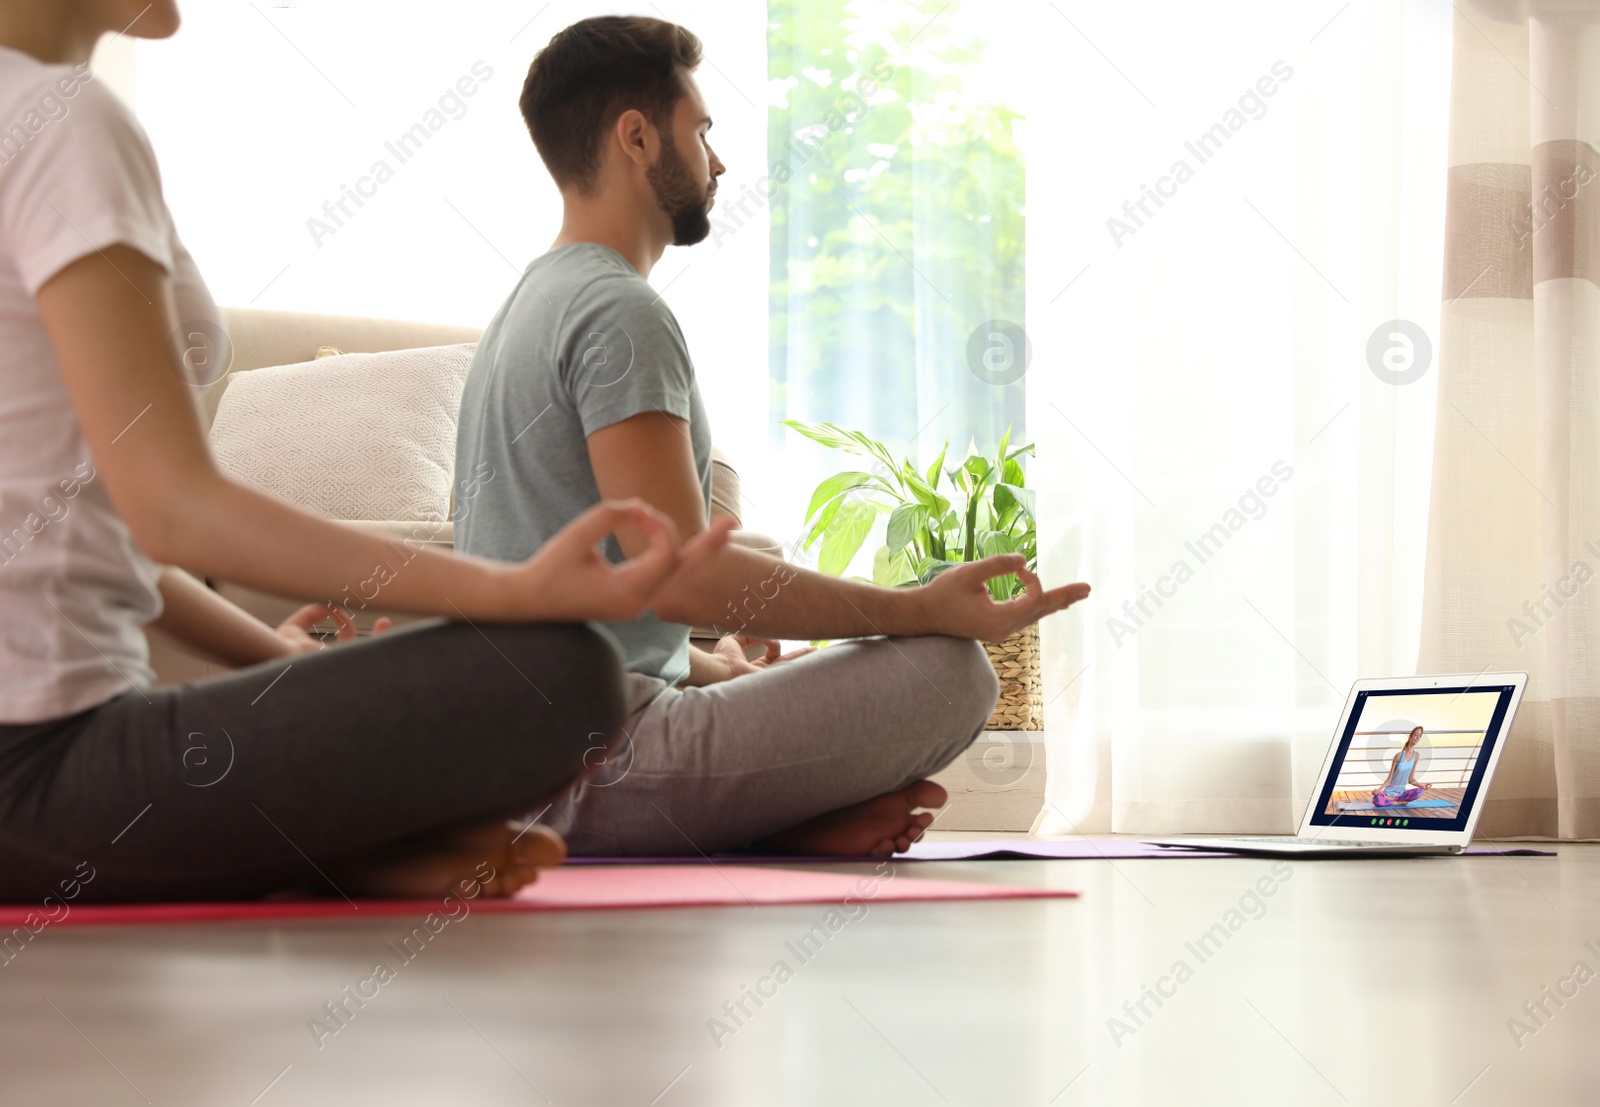 Image of Distance yoga course during coronavirus pandemic. Couple having online practice with instructor via laptop at home